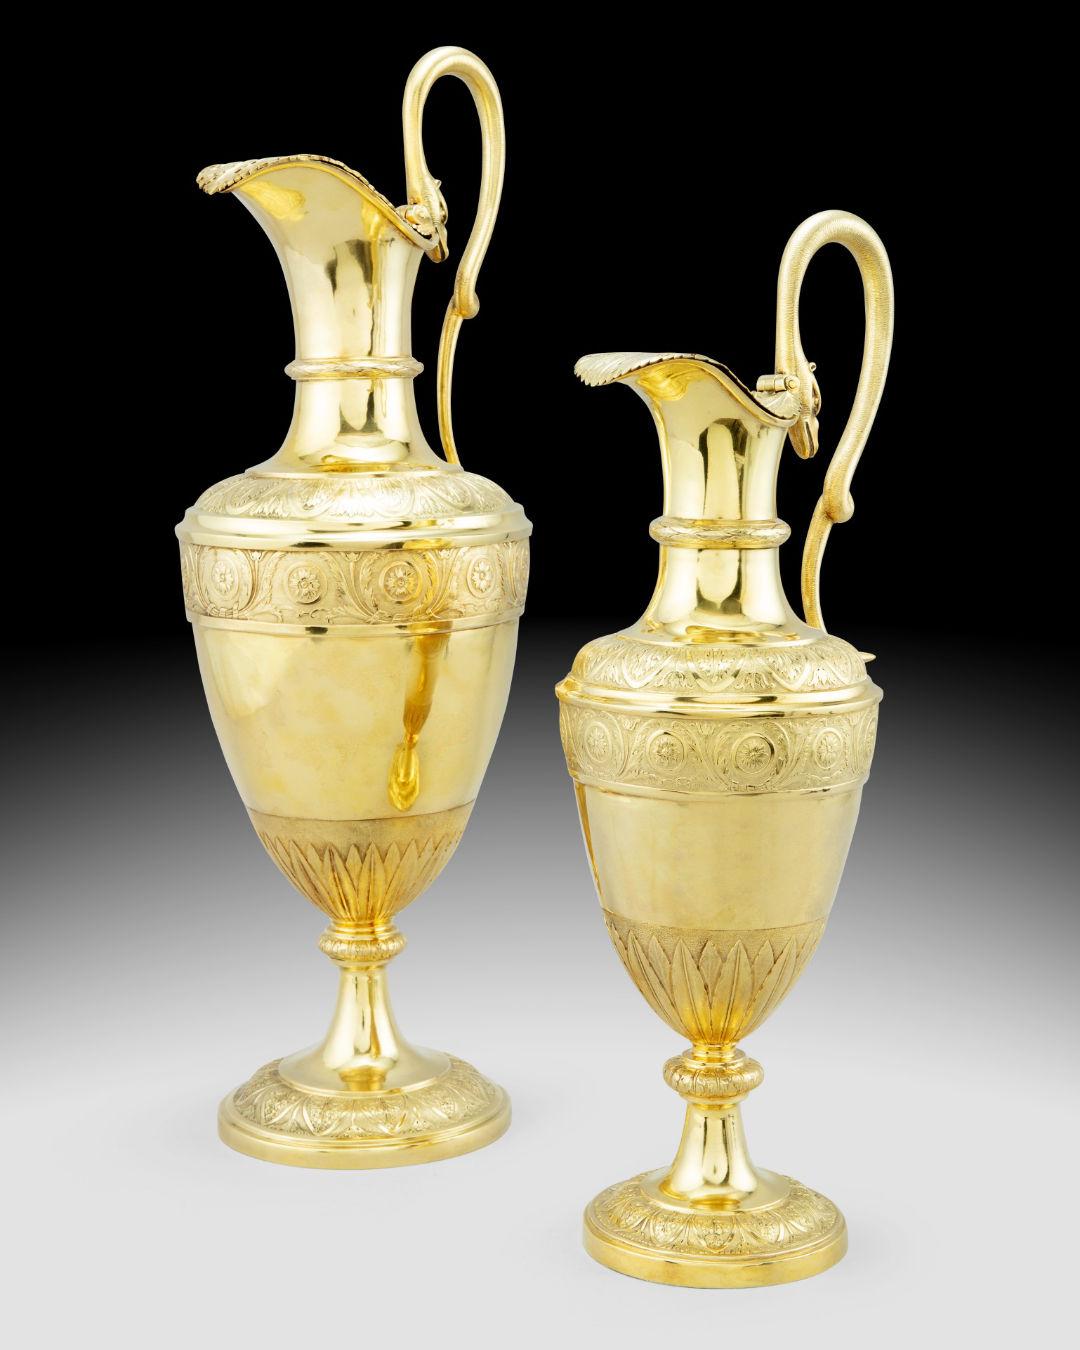 Our pair of elegant silver-gilt ewers are attributed to the Austrian maker, Johann Georg Hann of Vienna, circa 1780-1800. Heights: 17 7/8 and 22 1/2 in; 45 and 57.1 cm.  Total weight: 143 oz, 4,450 g.

Each of almost identical design, featuring